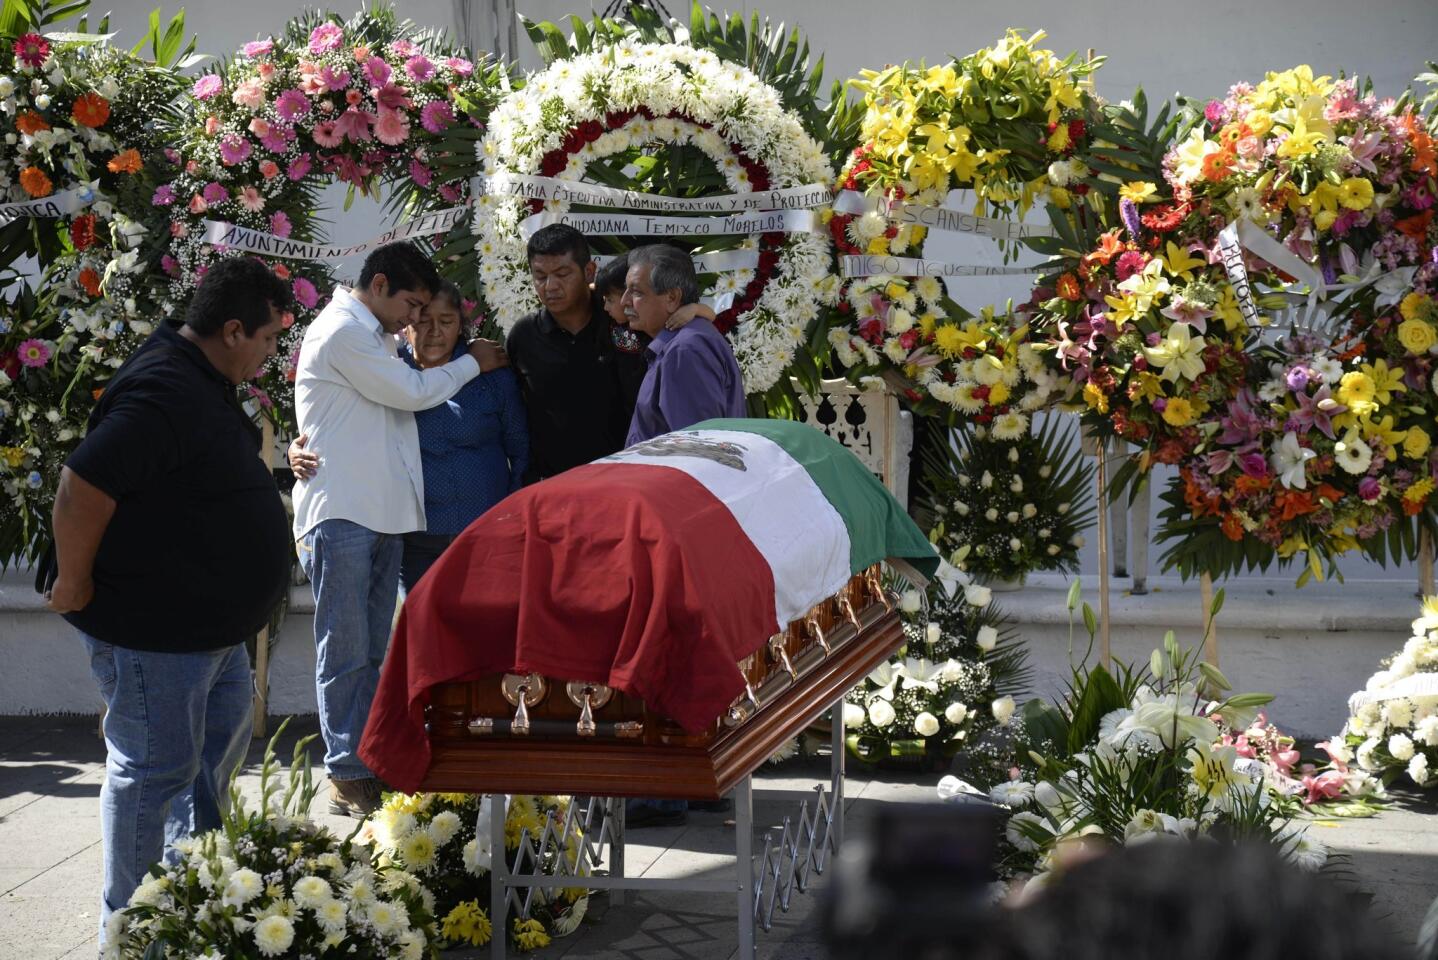 Family members of the slain mayor of Temixco, Gisela Mota, mourn next to her casket, during a ceremony in her honor, at the mayor's office building of Temixco, Mexico, Sunday, Jan. 3. Mota took office as mayor of the city of on Jan. 1 and was shot at her home on Jan. 2. (AP Photo/Tony Rivera)